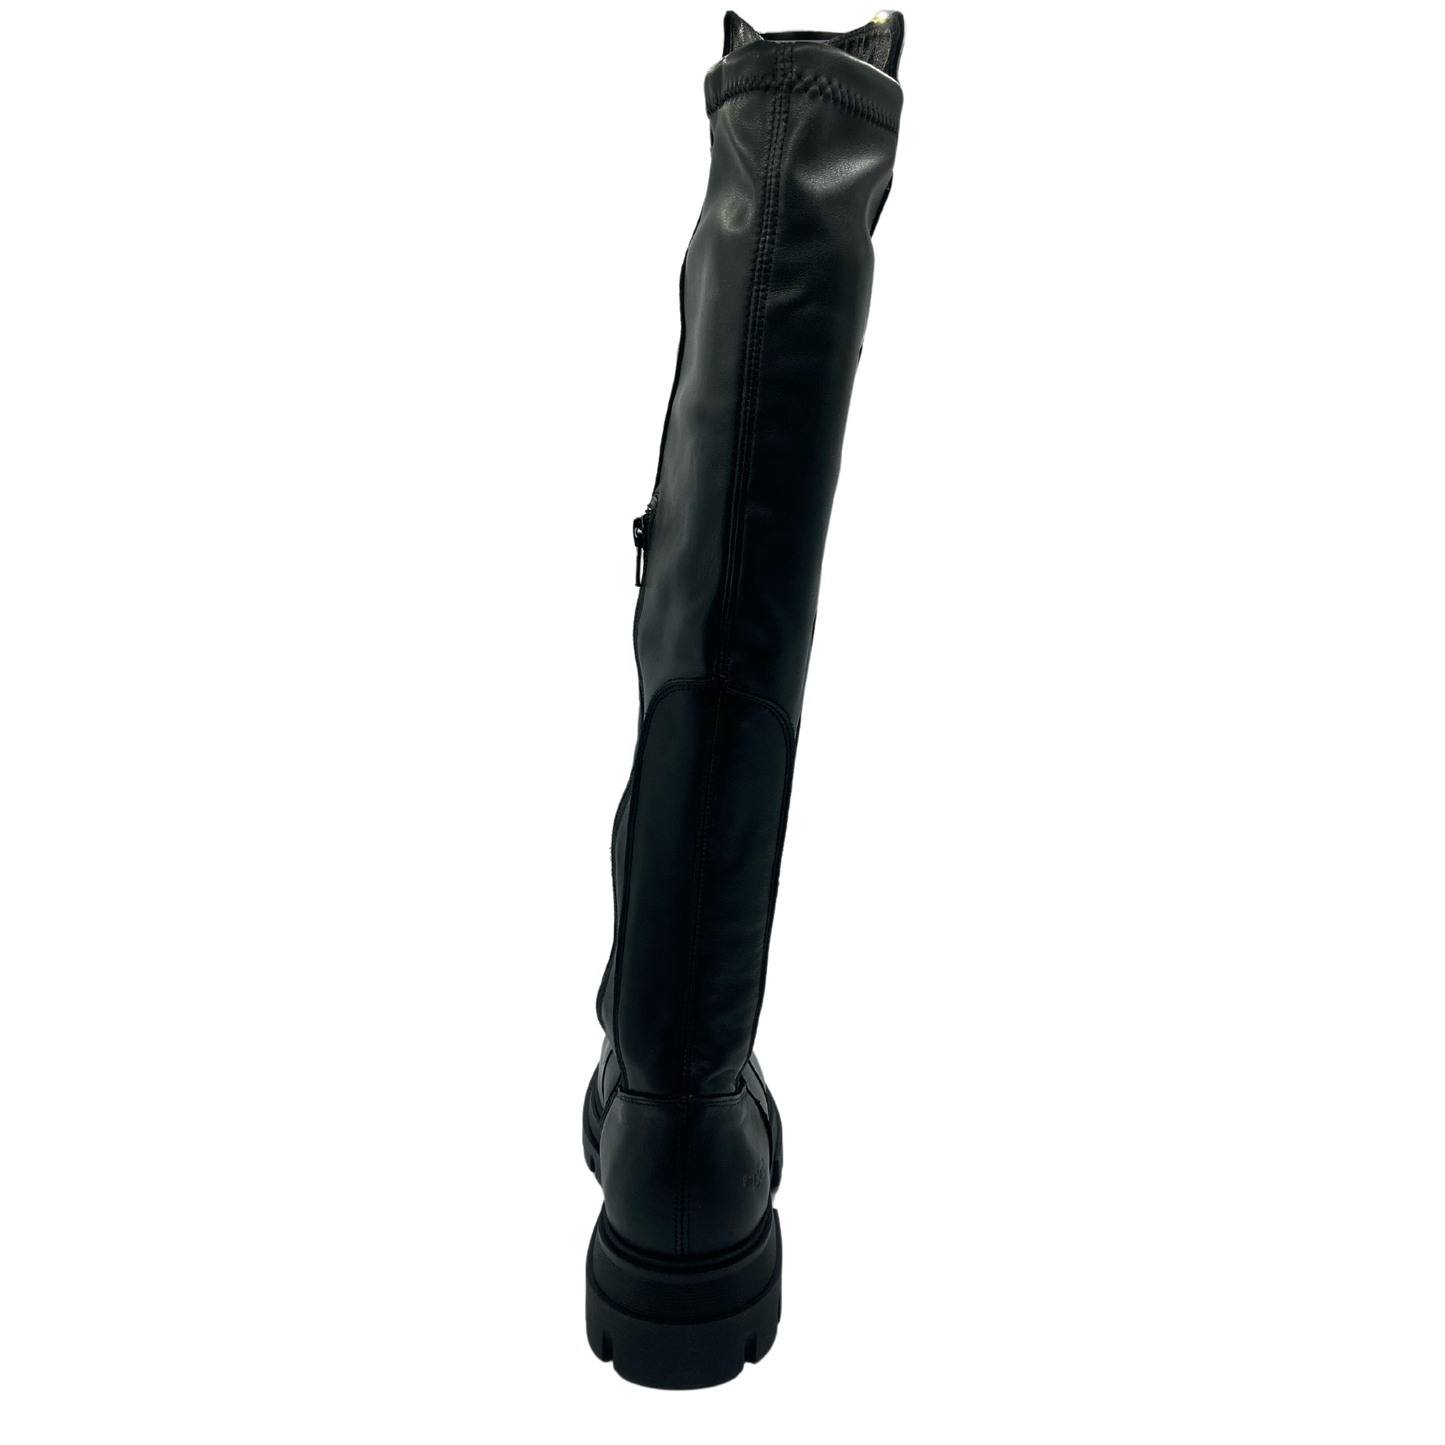 Back view of thigh high black leather boot with rubber platform sole